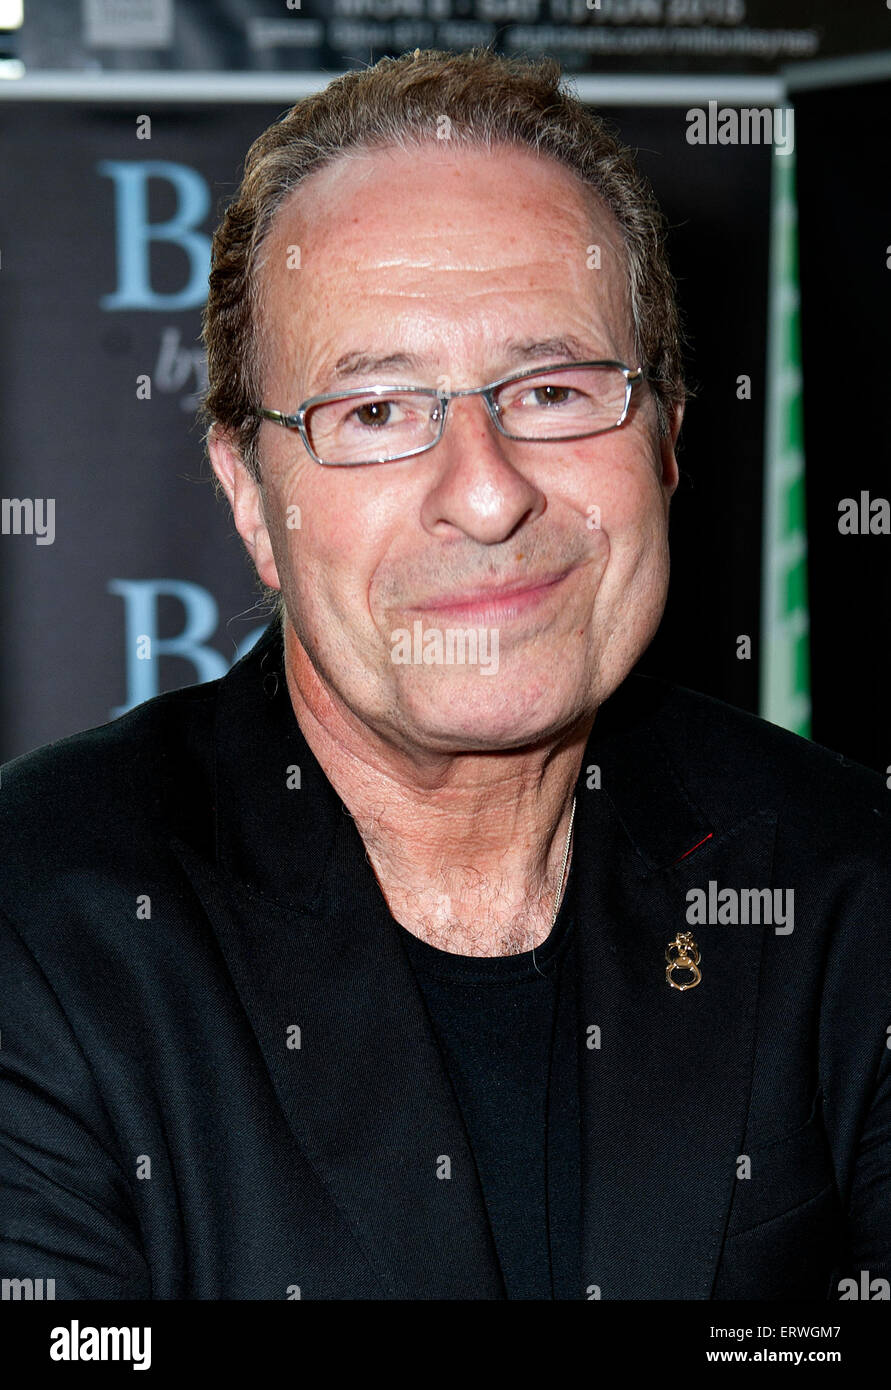 <b>Peter James</b> book signing of both &#39;Dead Simple&#39; and &#39;You are Dead&#39; at Milton ... - milton-keynes-uk-08th-june-2015-peter-james-book-signing-of-both-dead-ERWGM7